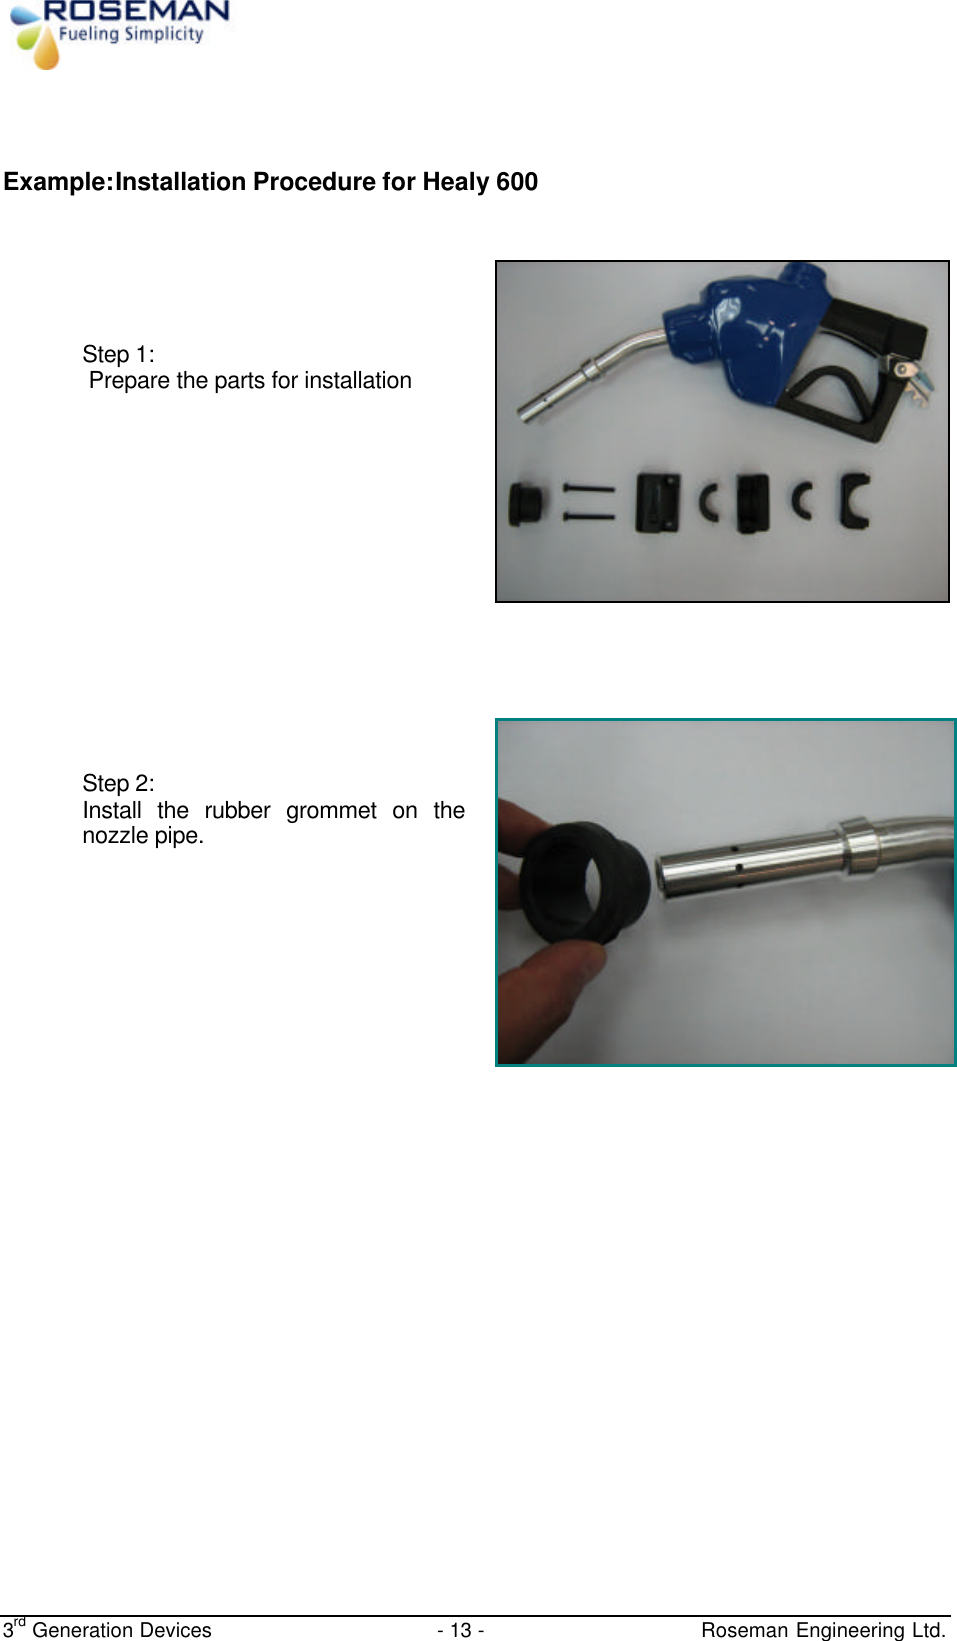  3rd Generation Devices - 13 -   Roseman Engineering Ltd.  Example:Installation Procedure for Healy 600      Step 1:  Prepare the parts for installation       Step 2: Install the rubber grommet on the nozzle pipe.   /4&quot; Nozzle Guard Attaching screws  